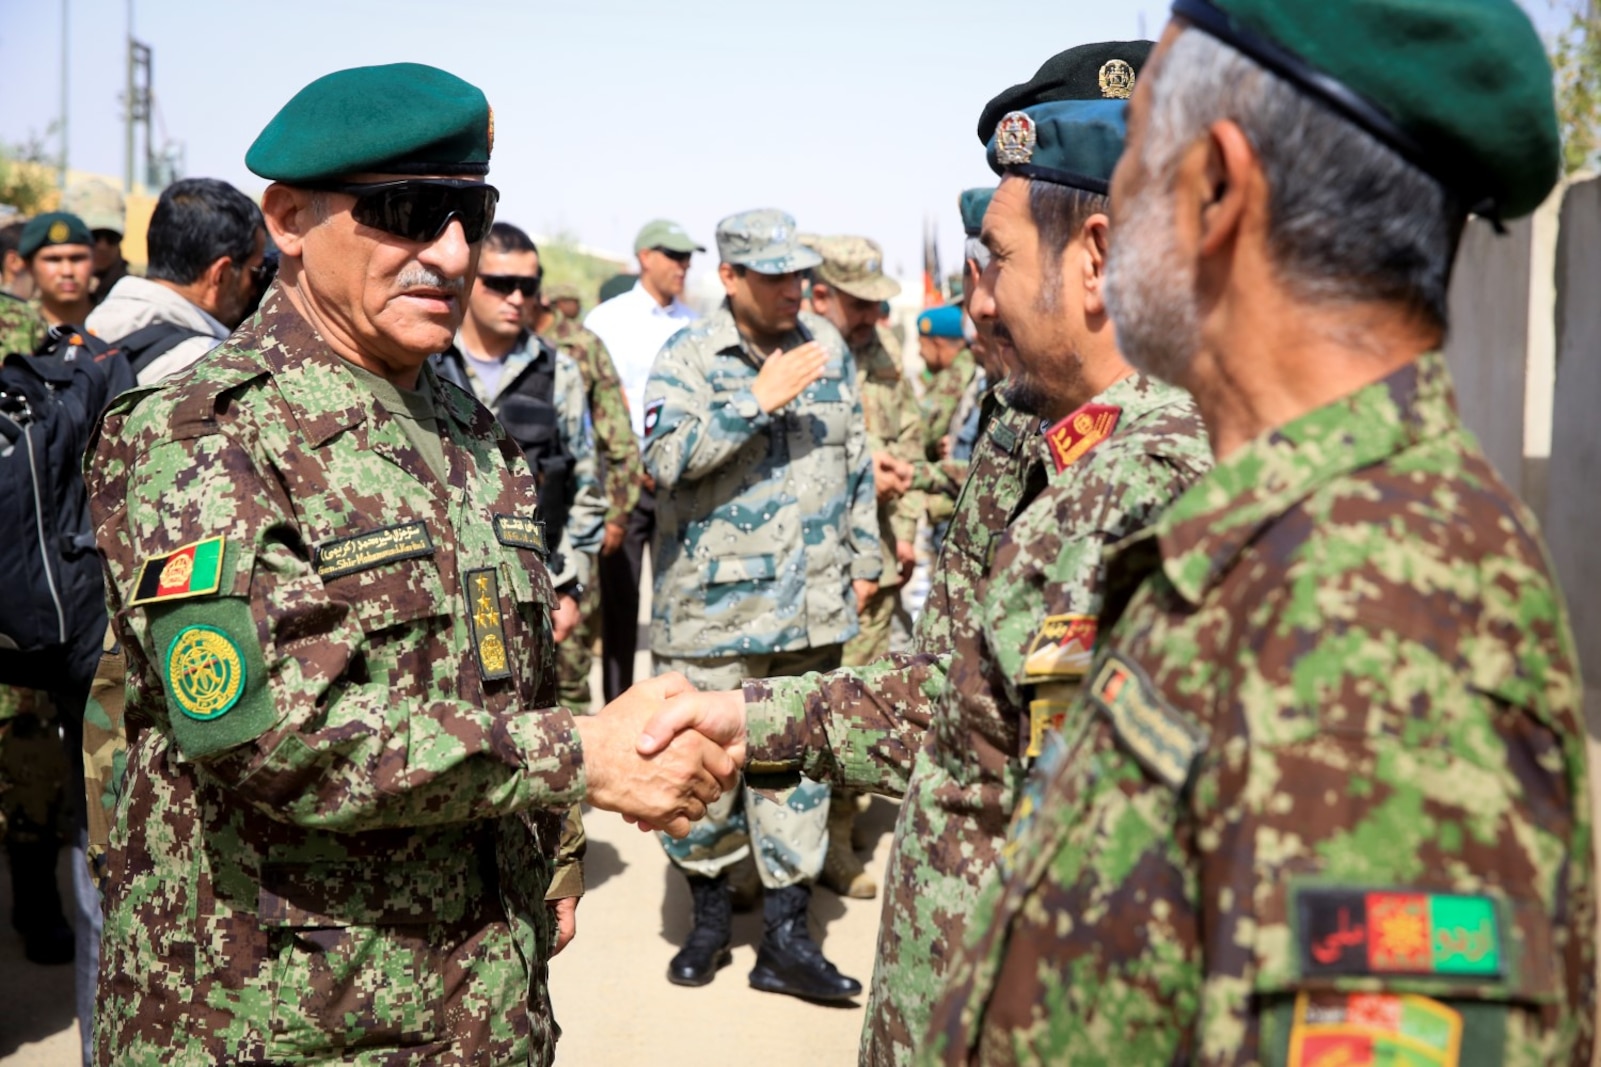 Afghan National Army (ANA) Gen. Shir Mohammad Karimi, chief of army staff, shakes hands with ANA officers, assigned to the 215th Corps, aboard Camp Shorabak, Helmand province, Afghanistan, June 27, 2014. Karimi visited with ANA leaders and ISAF advisors to discuss the military matters in the southwest region of Afghanistan.
(Official U.S. Marine Corps photo by Lance Cpl. Darien J. Bjorndal, Marine Expeditionary Brigade Afghanistan/ Released)